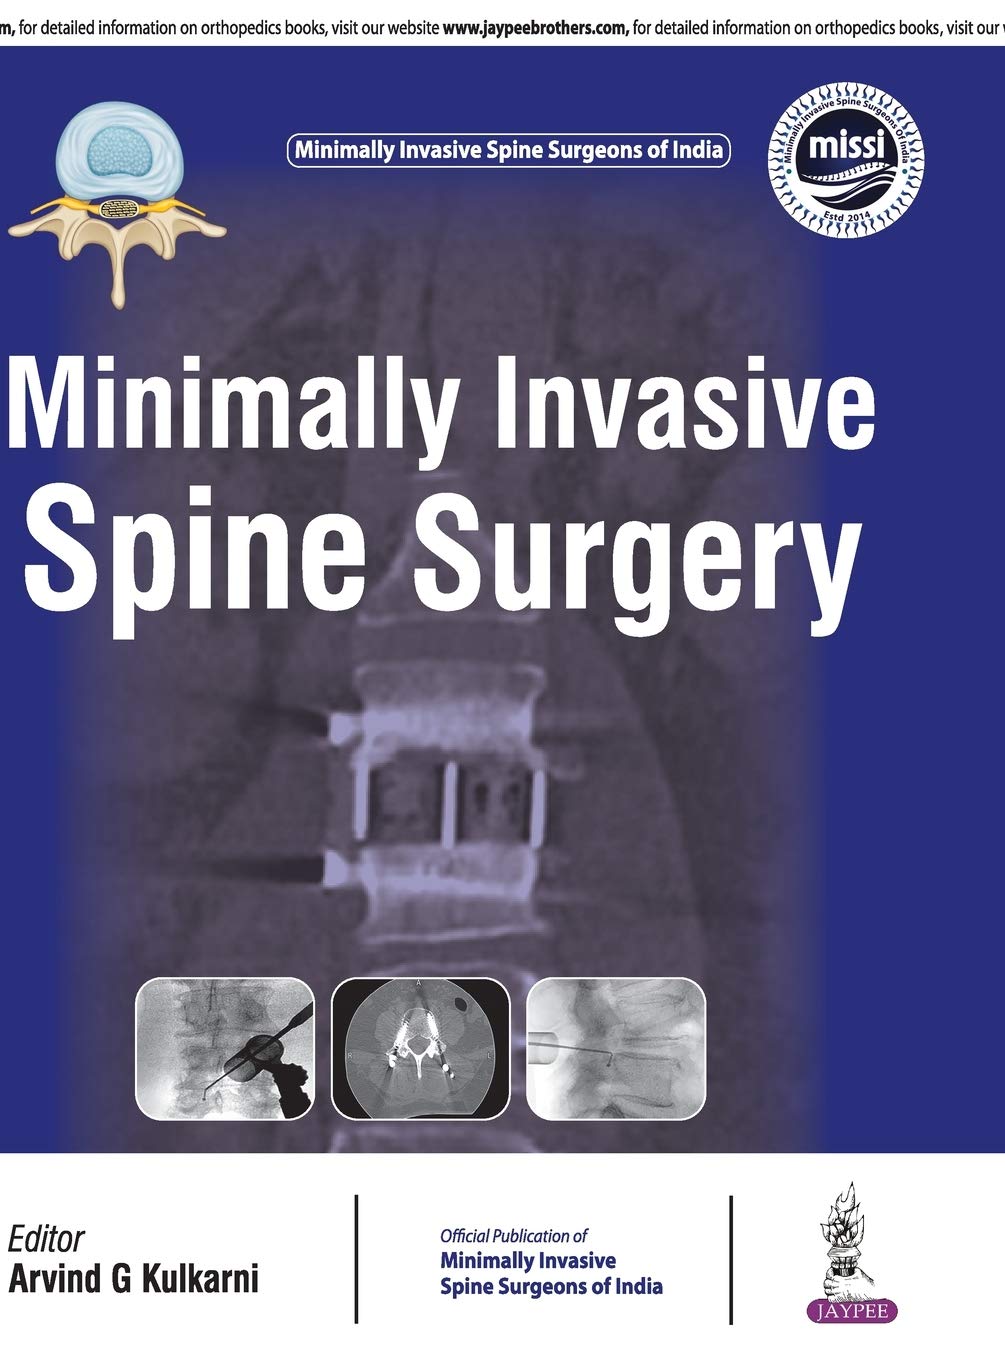 Minimally Invasive Spine Surgery(Official Publication Of Minimally Invasive Spine Surgeons Of India)